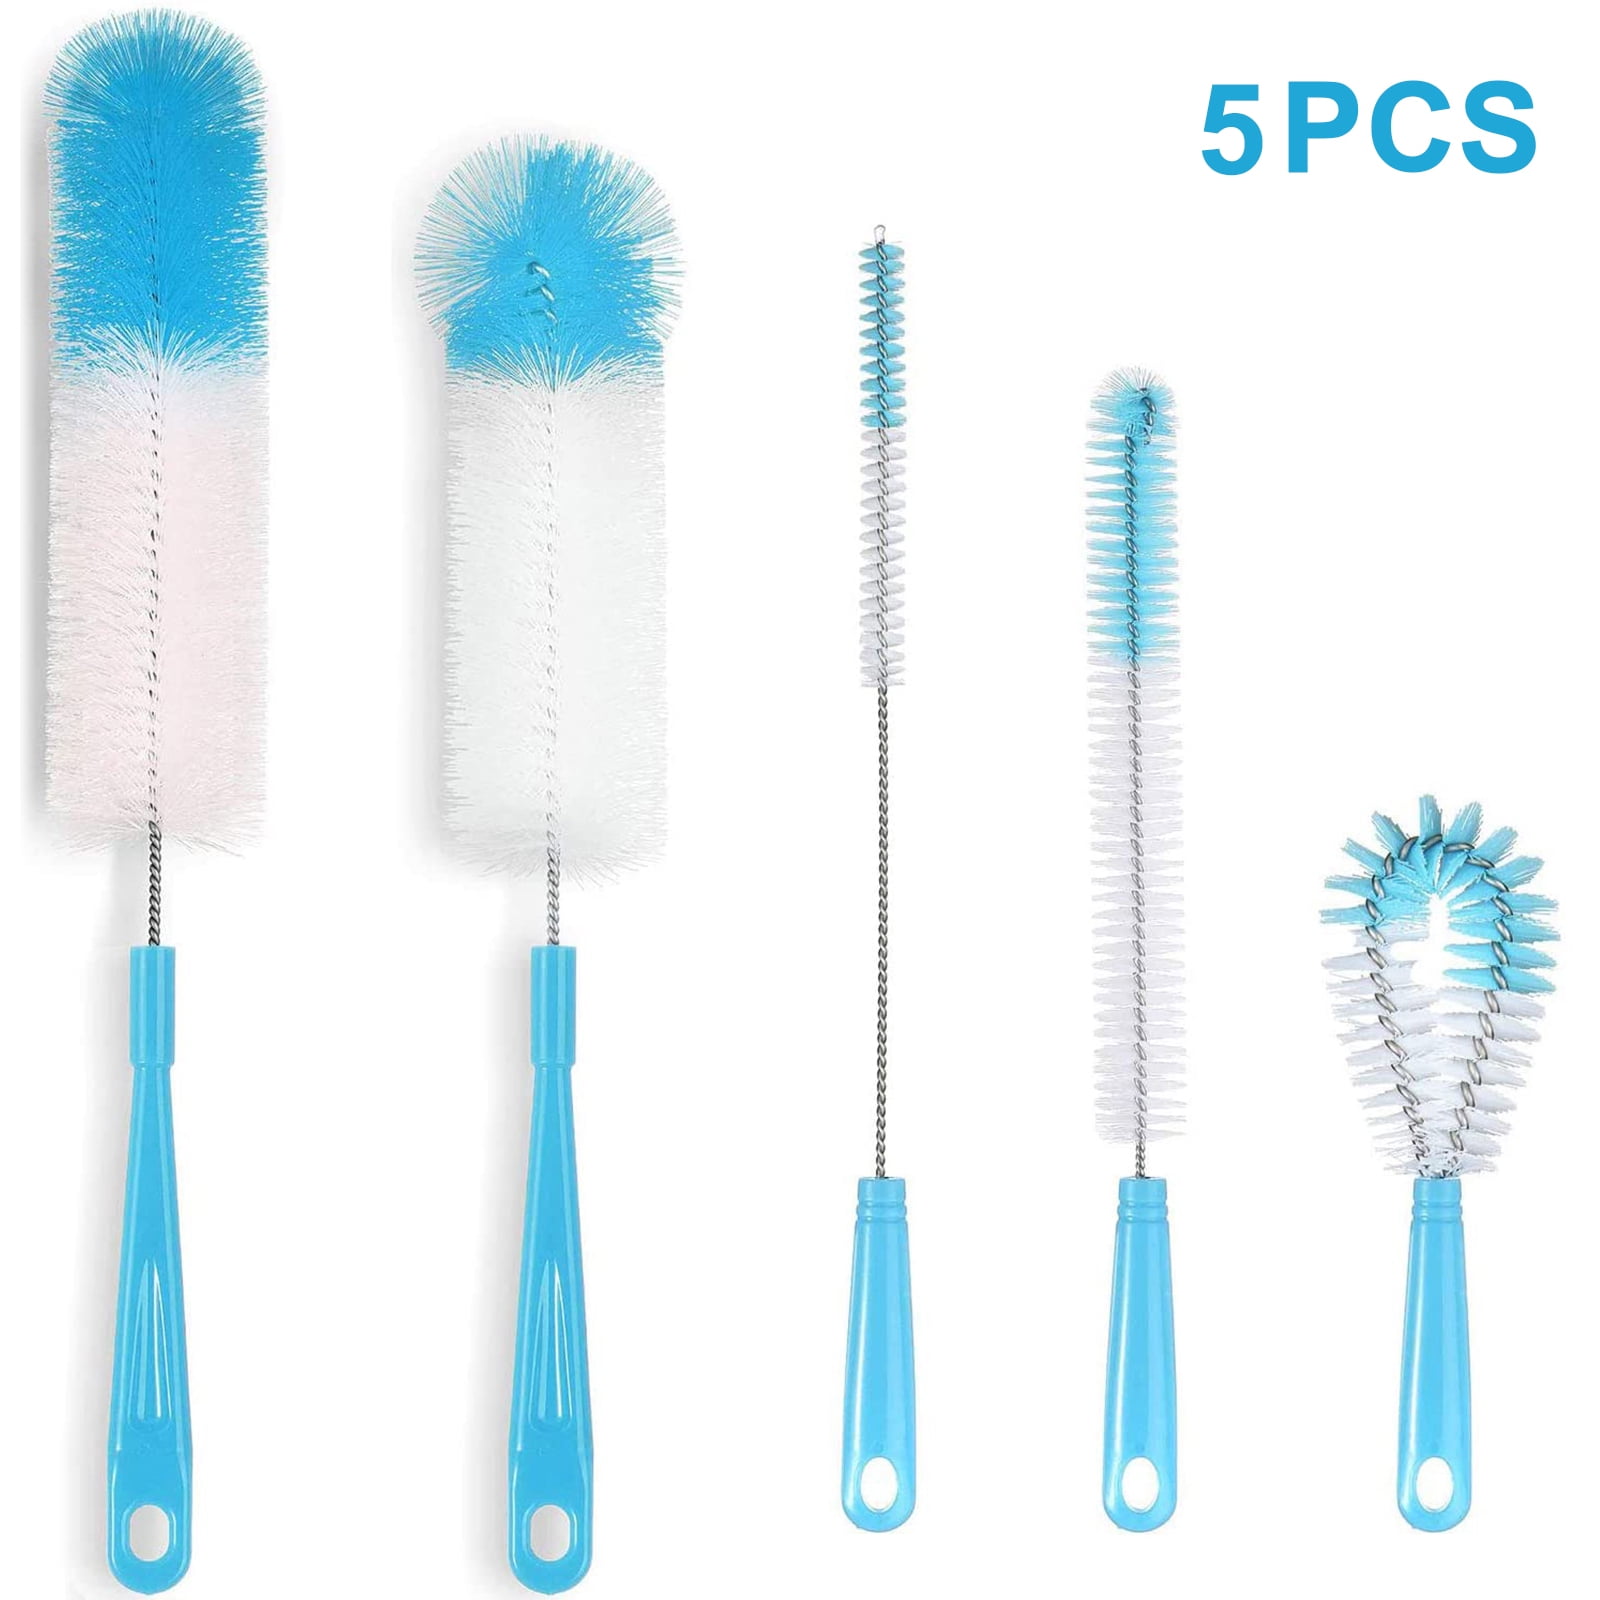 3 in 1 Tiny Cleaning Brush, 3 Pack Cup Lid Cleaner Brushes Set Mini  Multi-Functional Crevice Cleaning Brush for Cleaning Baby Bottles, Narrow  Neck